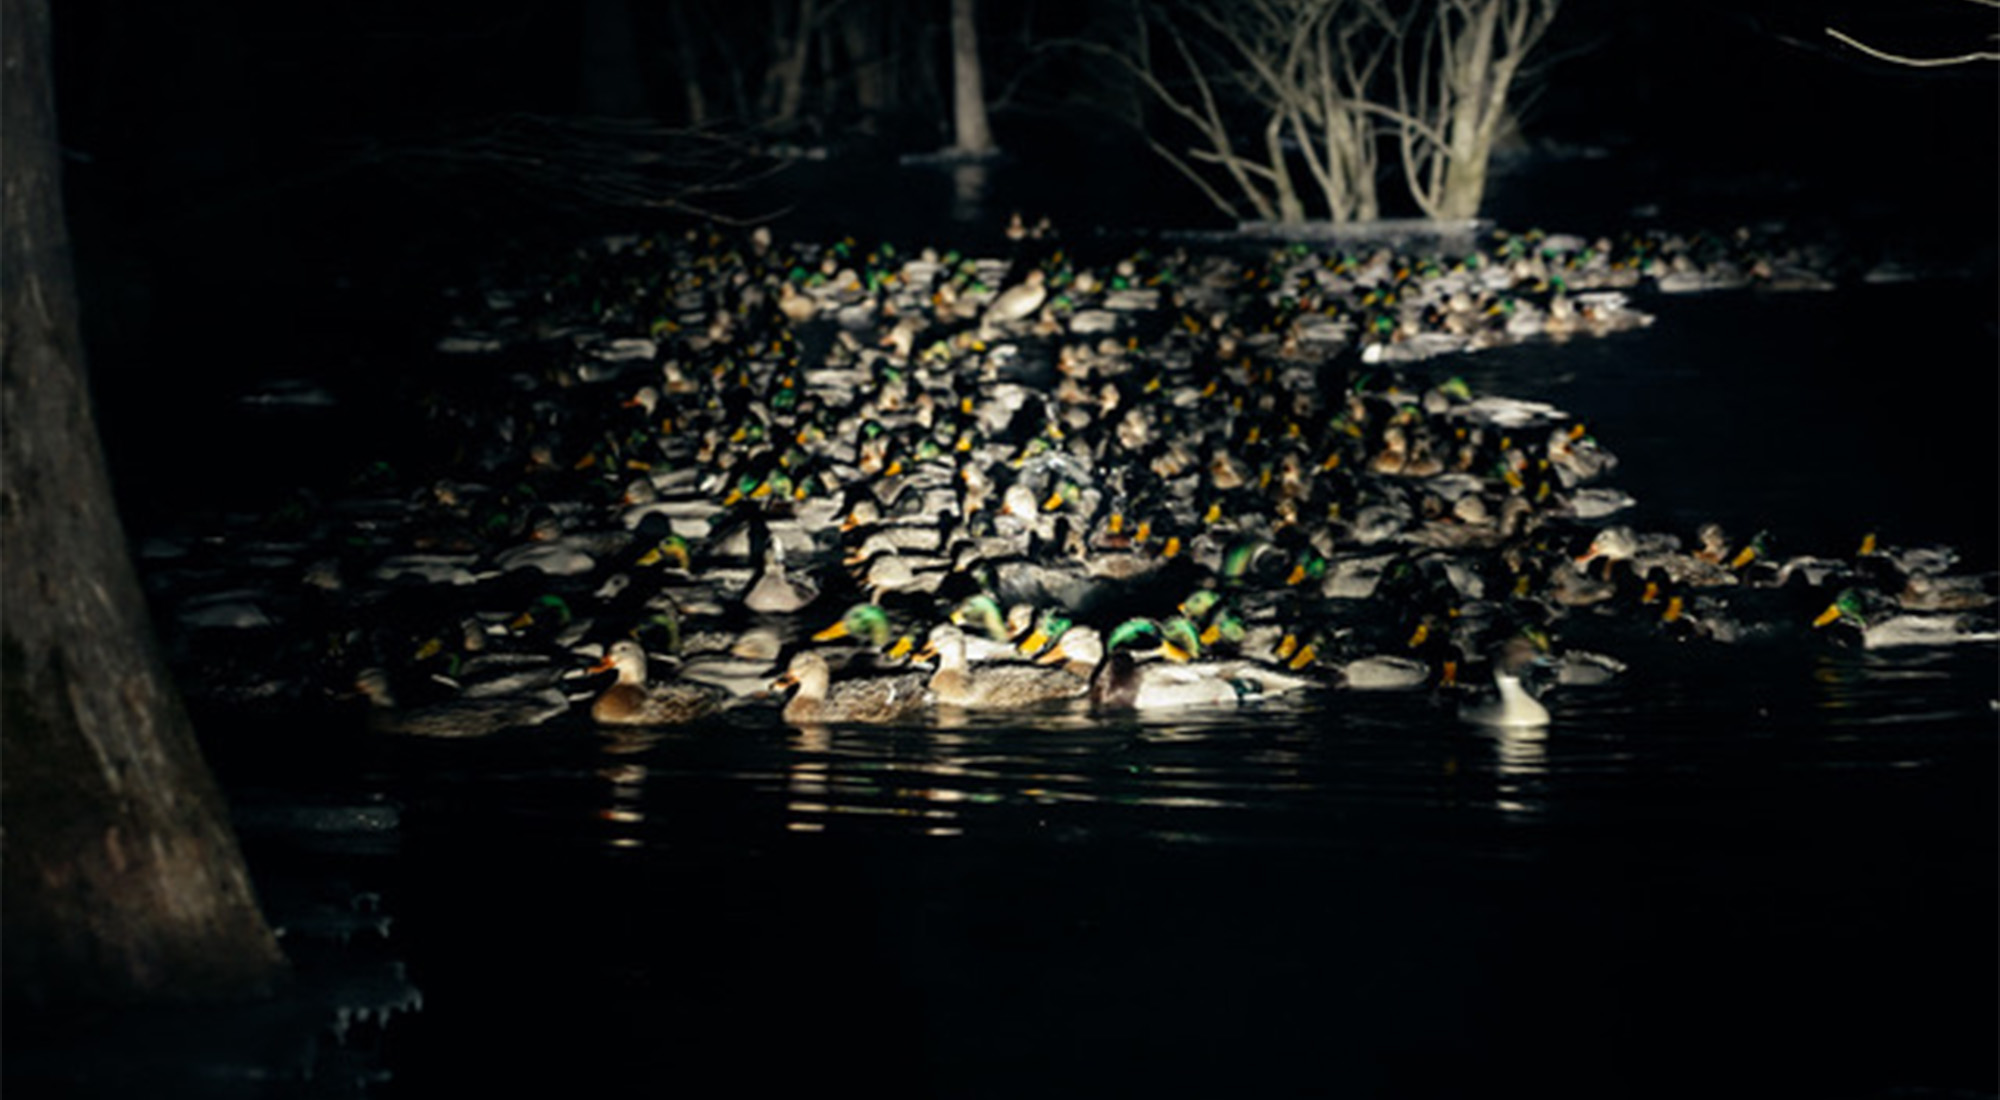 A gigantic raft of mallards lit up by a spotlight in the flooded timber.